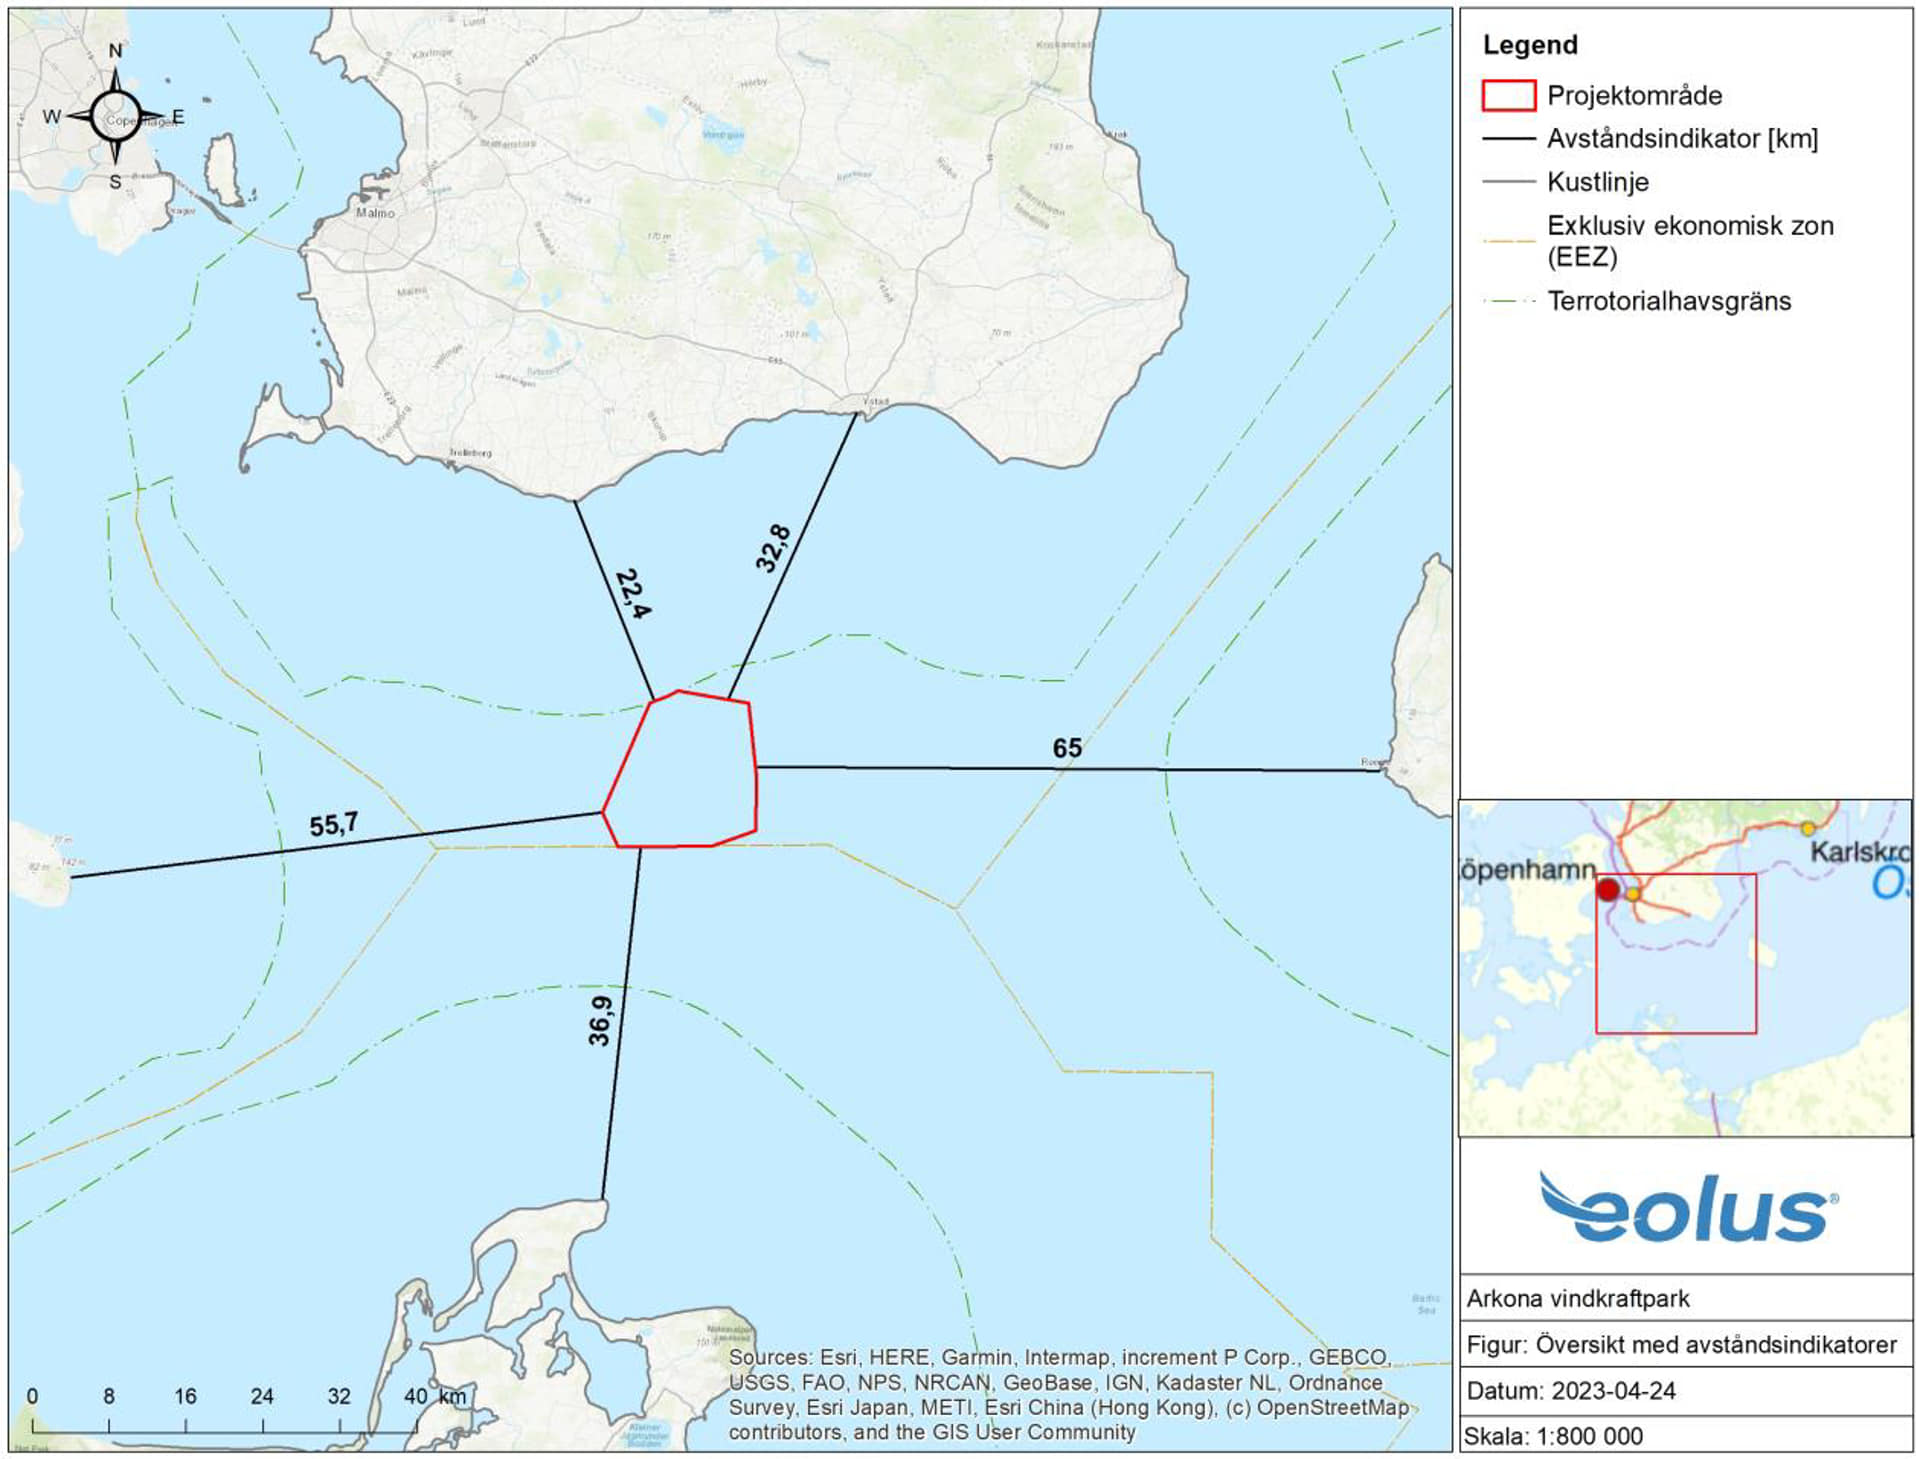 An image showing the Location of the Arkona offshore wind farm in Sweden on a map